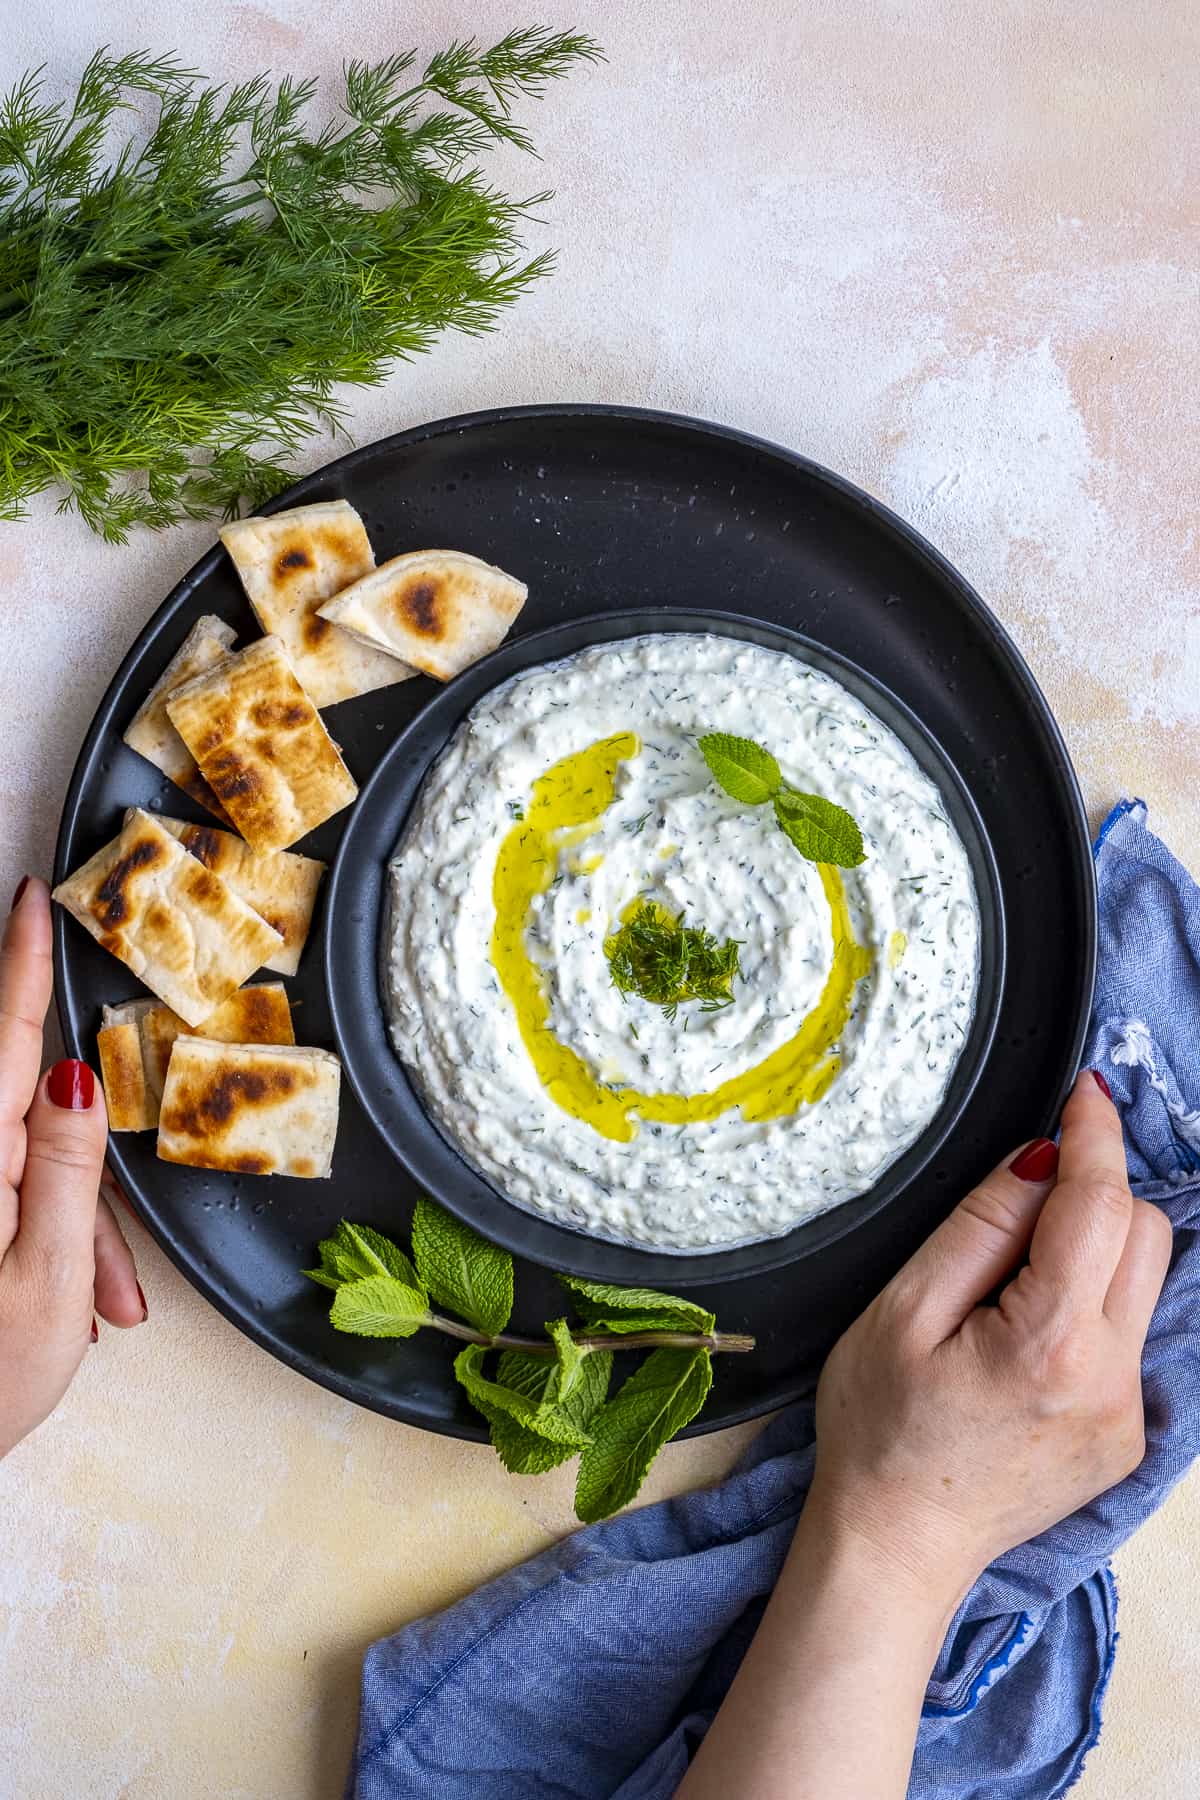 Woman hands holding haydari meze and pita bread slices on a black plate. Fresh dill and mint leaves on the side.